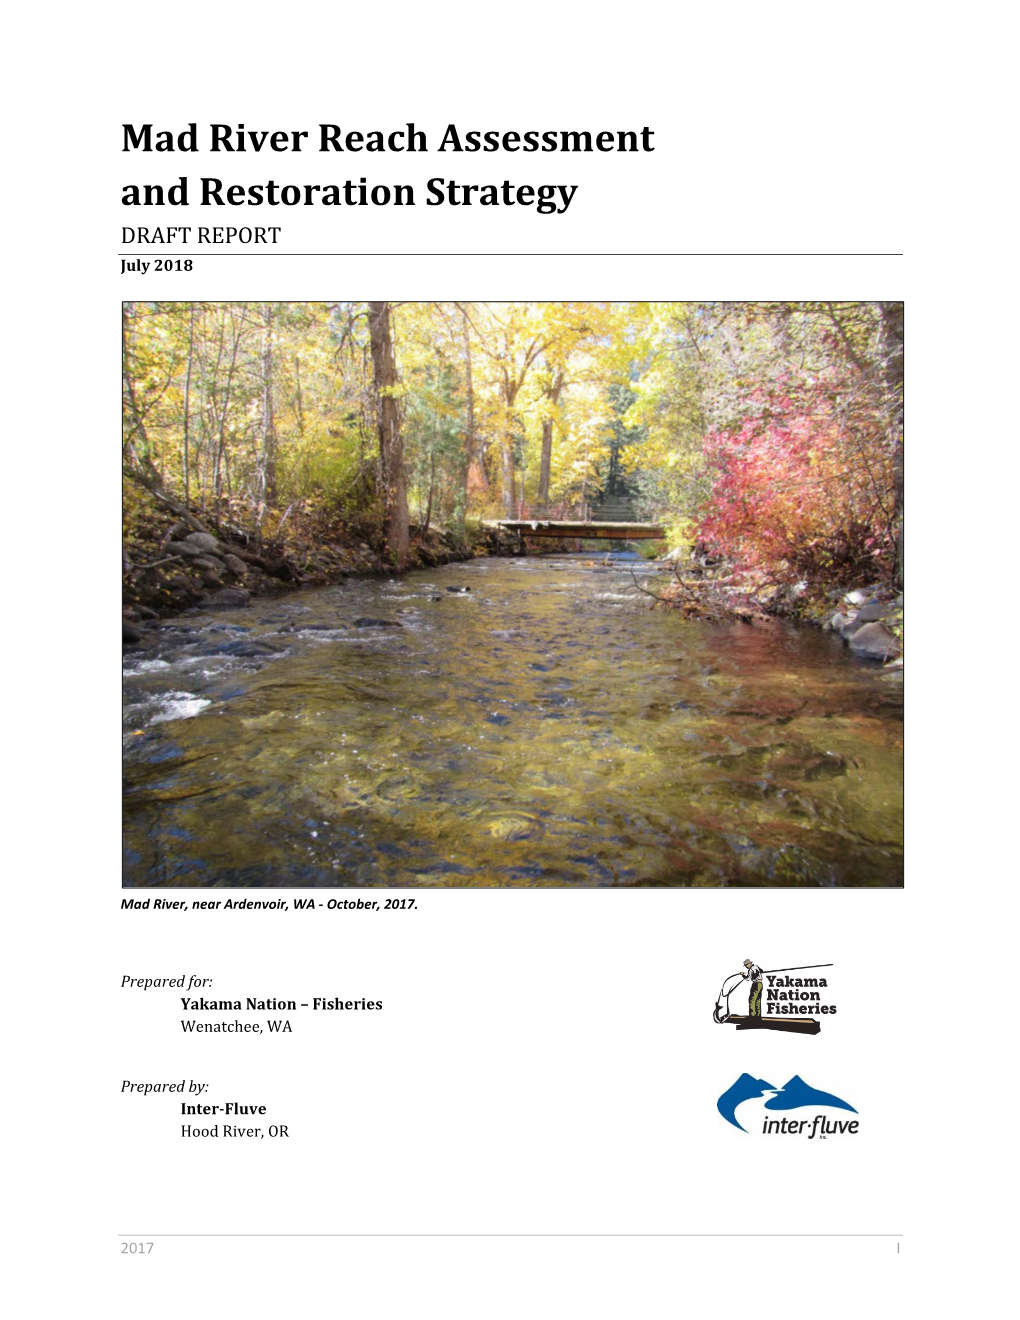 Mad River Reach Assessment and Restoration Strategy DRAFT REPORT July 2018